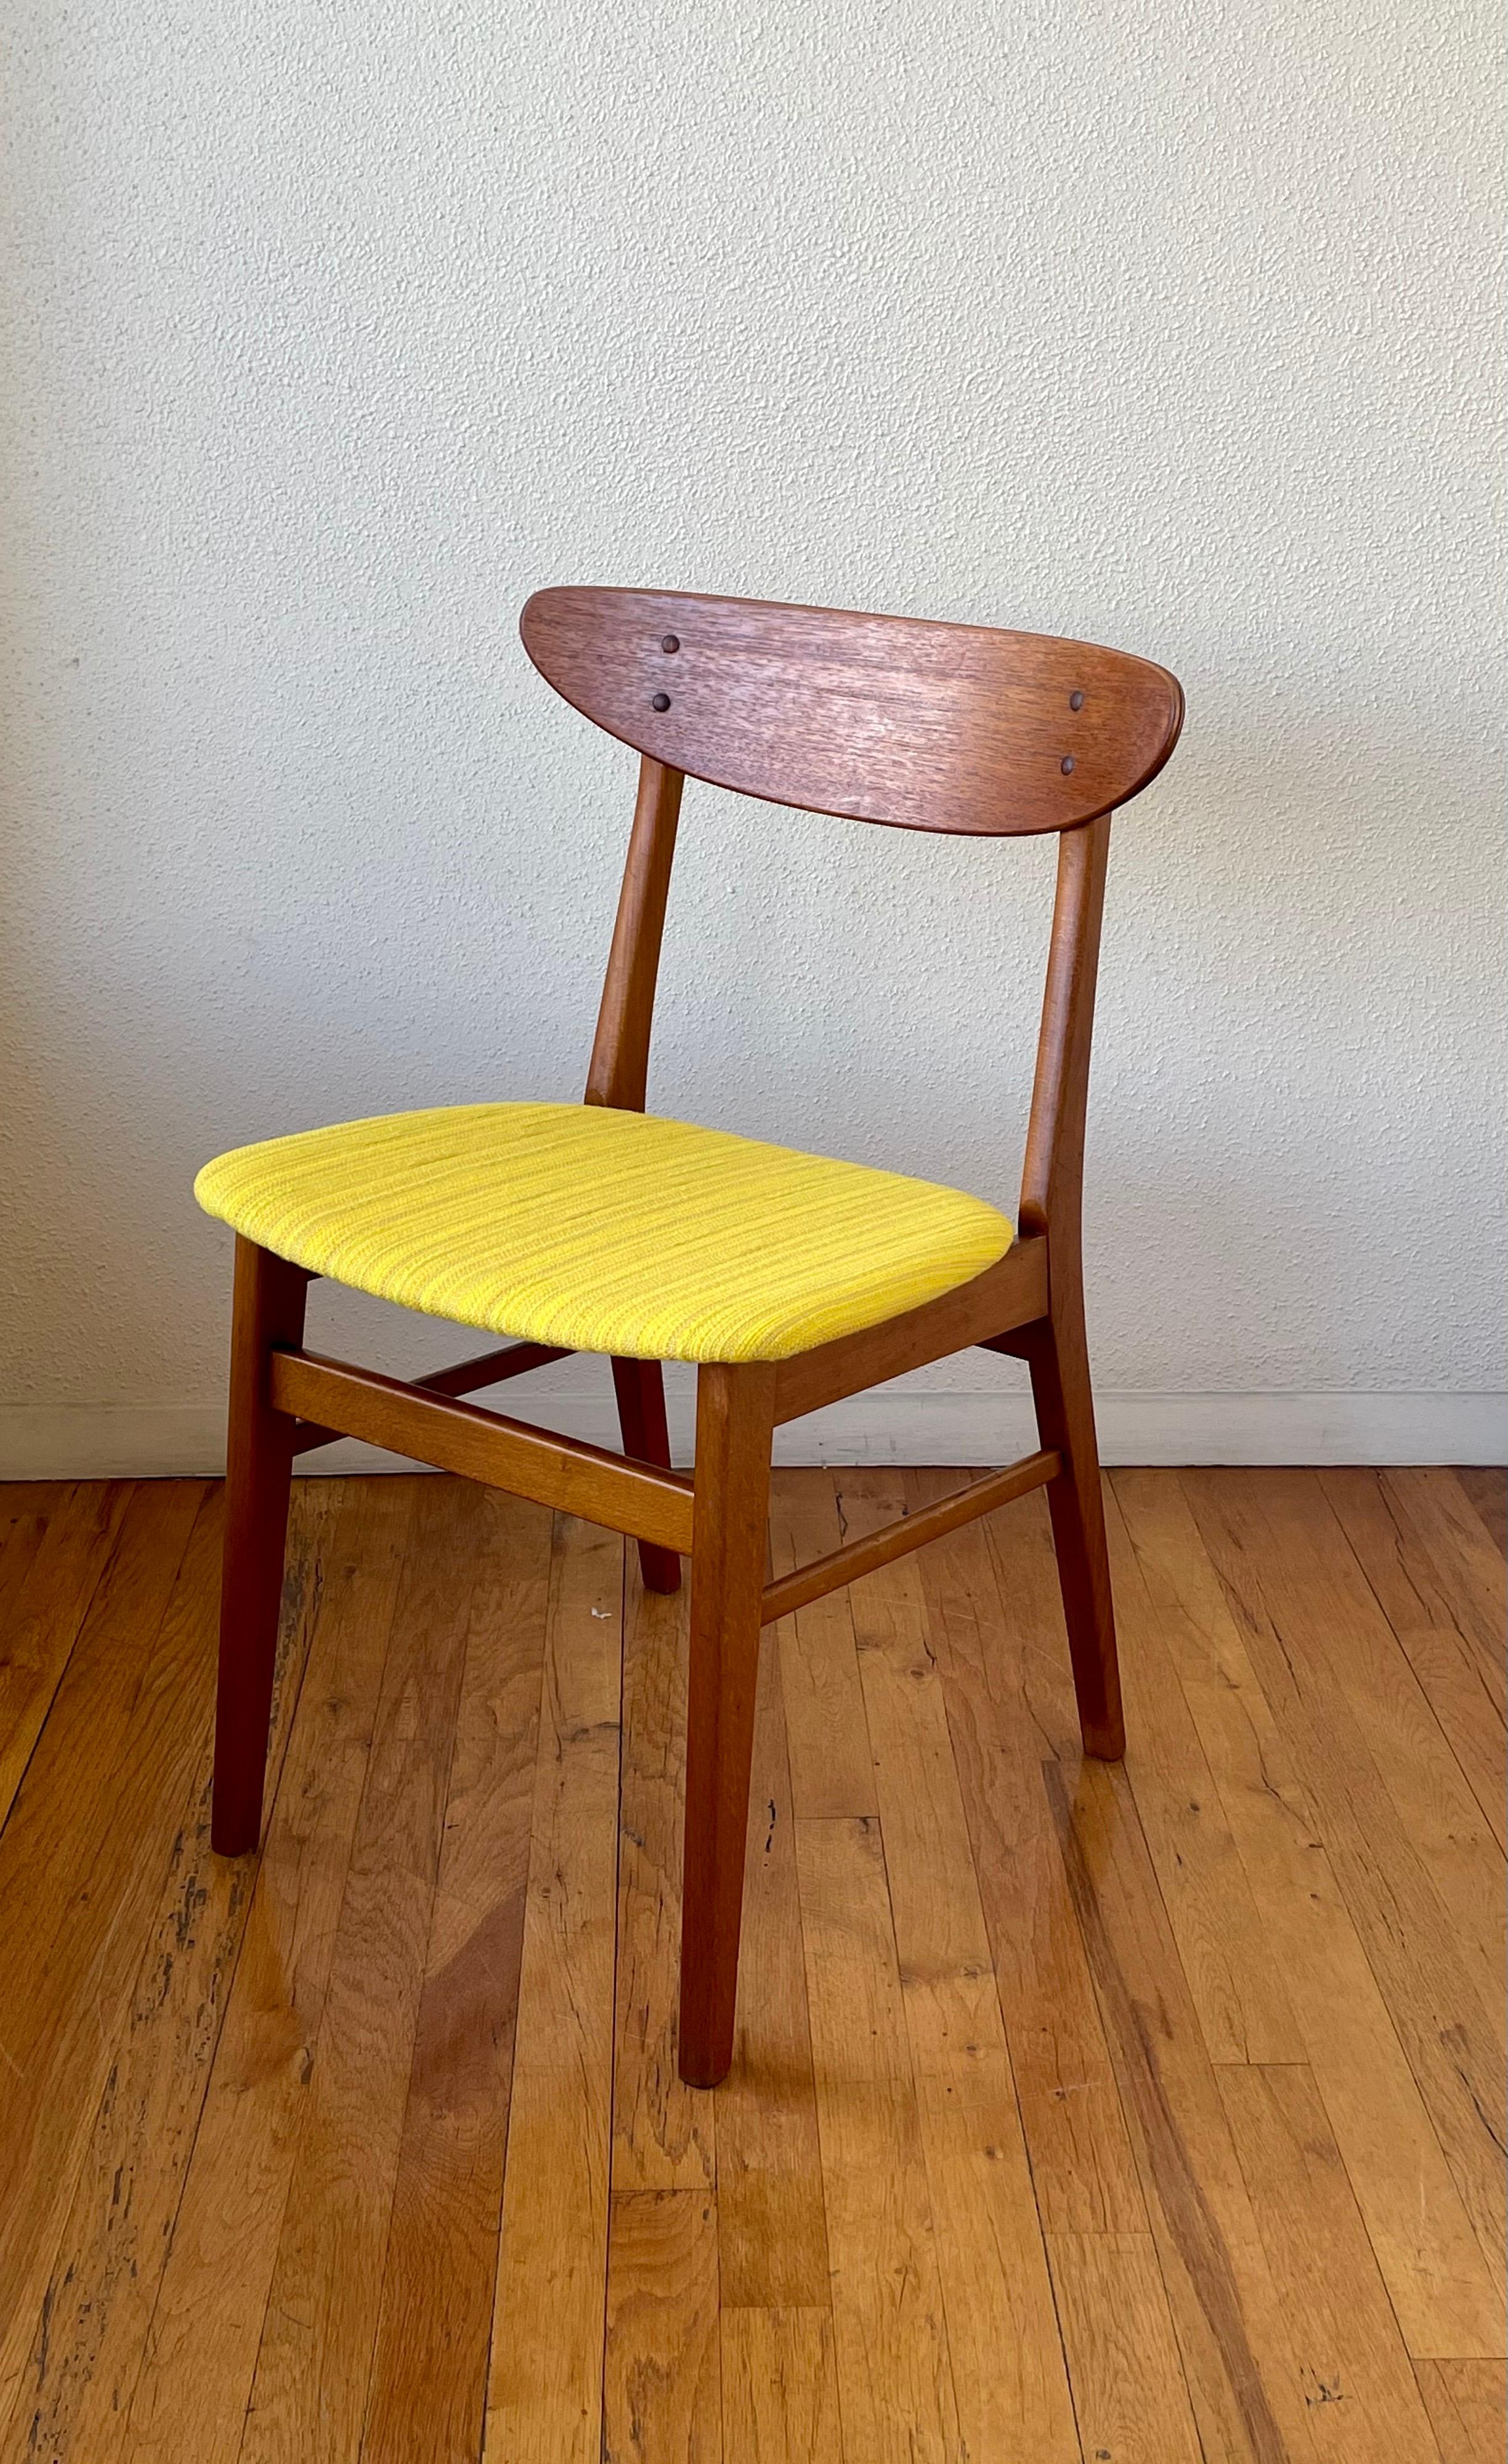 Beautiful pair of Danish chairs with solid maple frames and molder curved backrest in teak, circa 1950s we have refinished the chairs recover the seats with original vintage Danish fabric, reglue the joints these chairs are solid and sturdy and